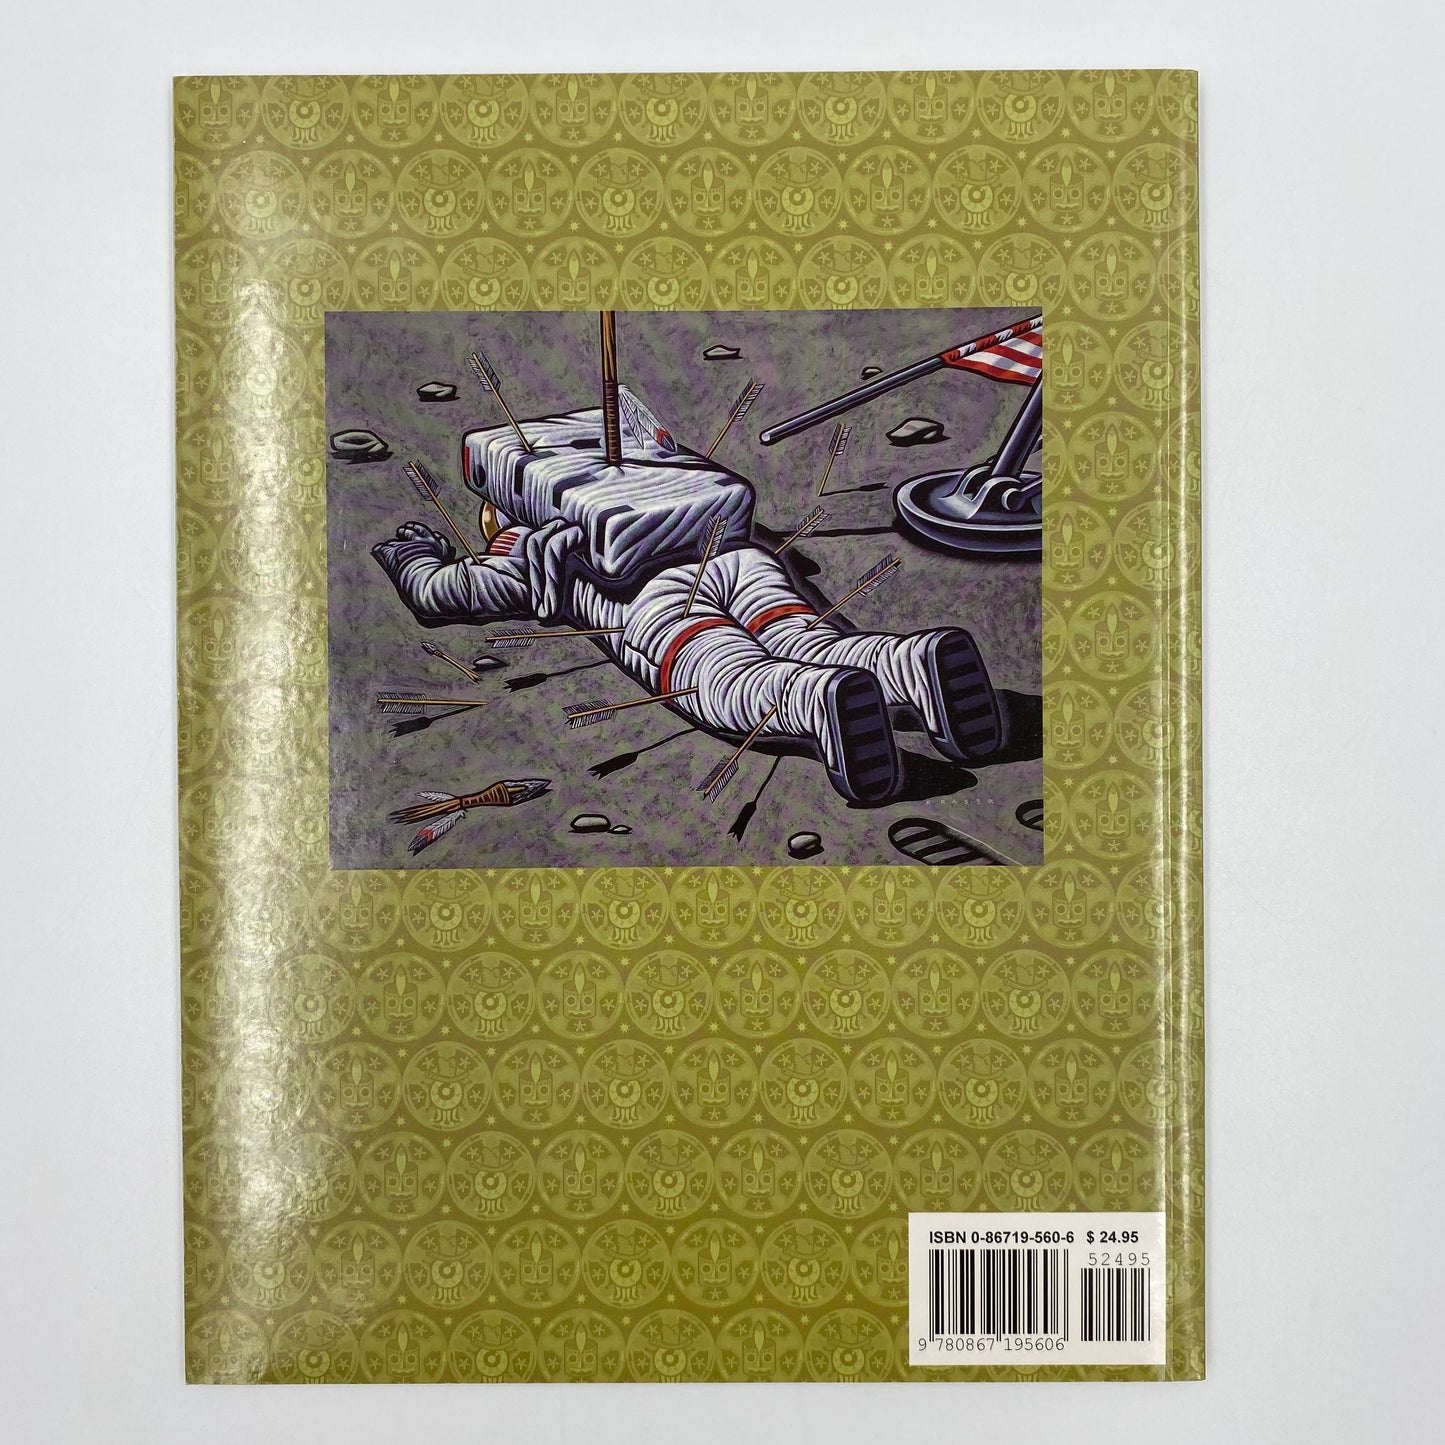 Sci-Fi Western A Catalog of 93 Artists Presented by 111 Mina Gallery of San Francisco  softcover (2003) Last Gasp